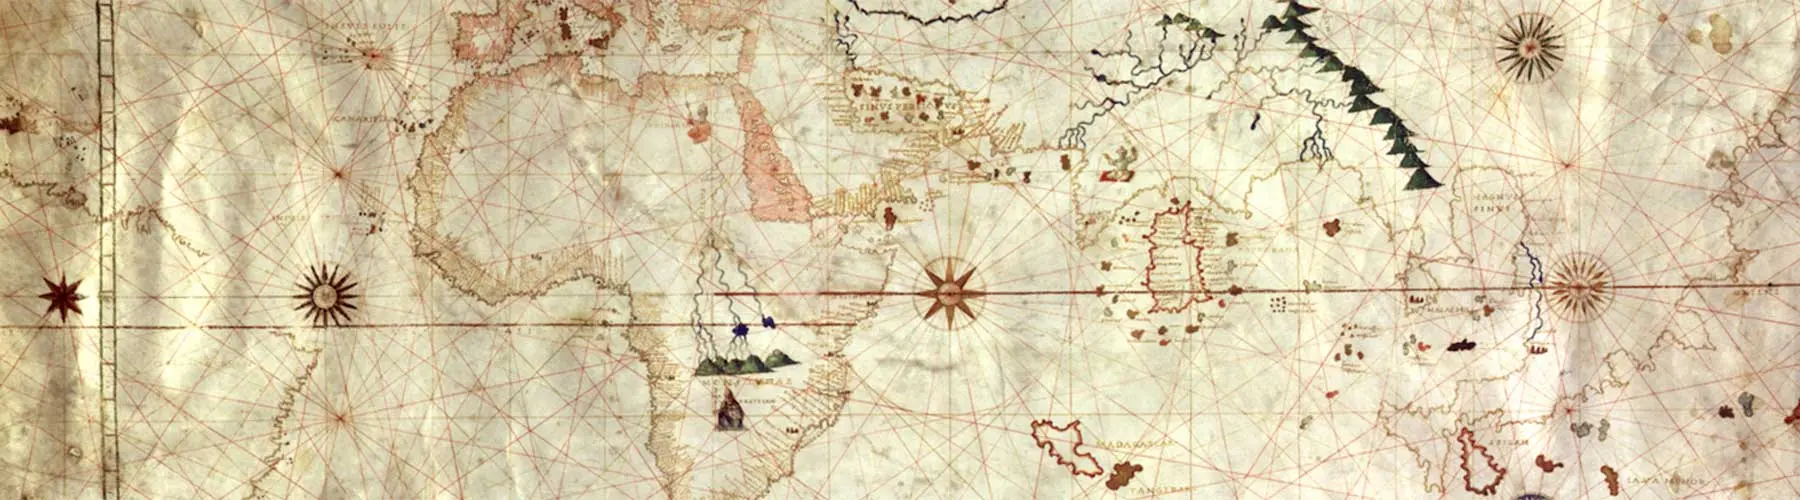 cropped image of a map